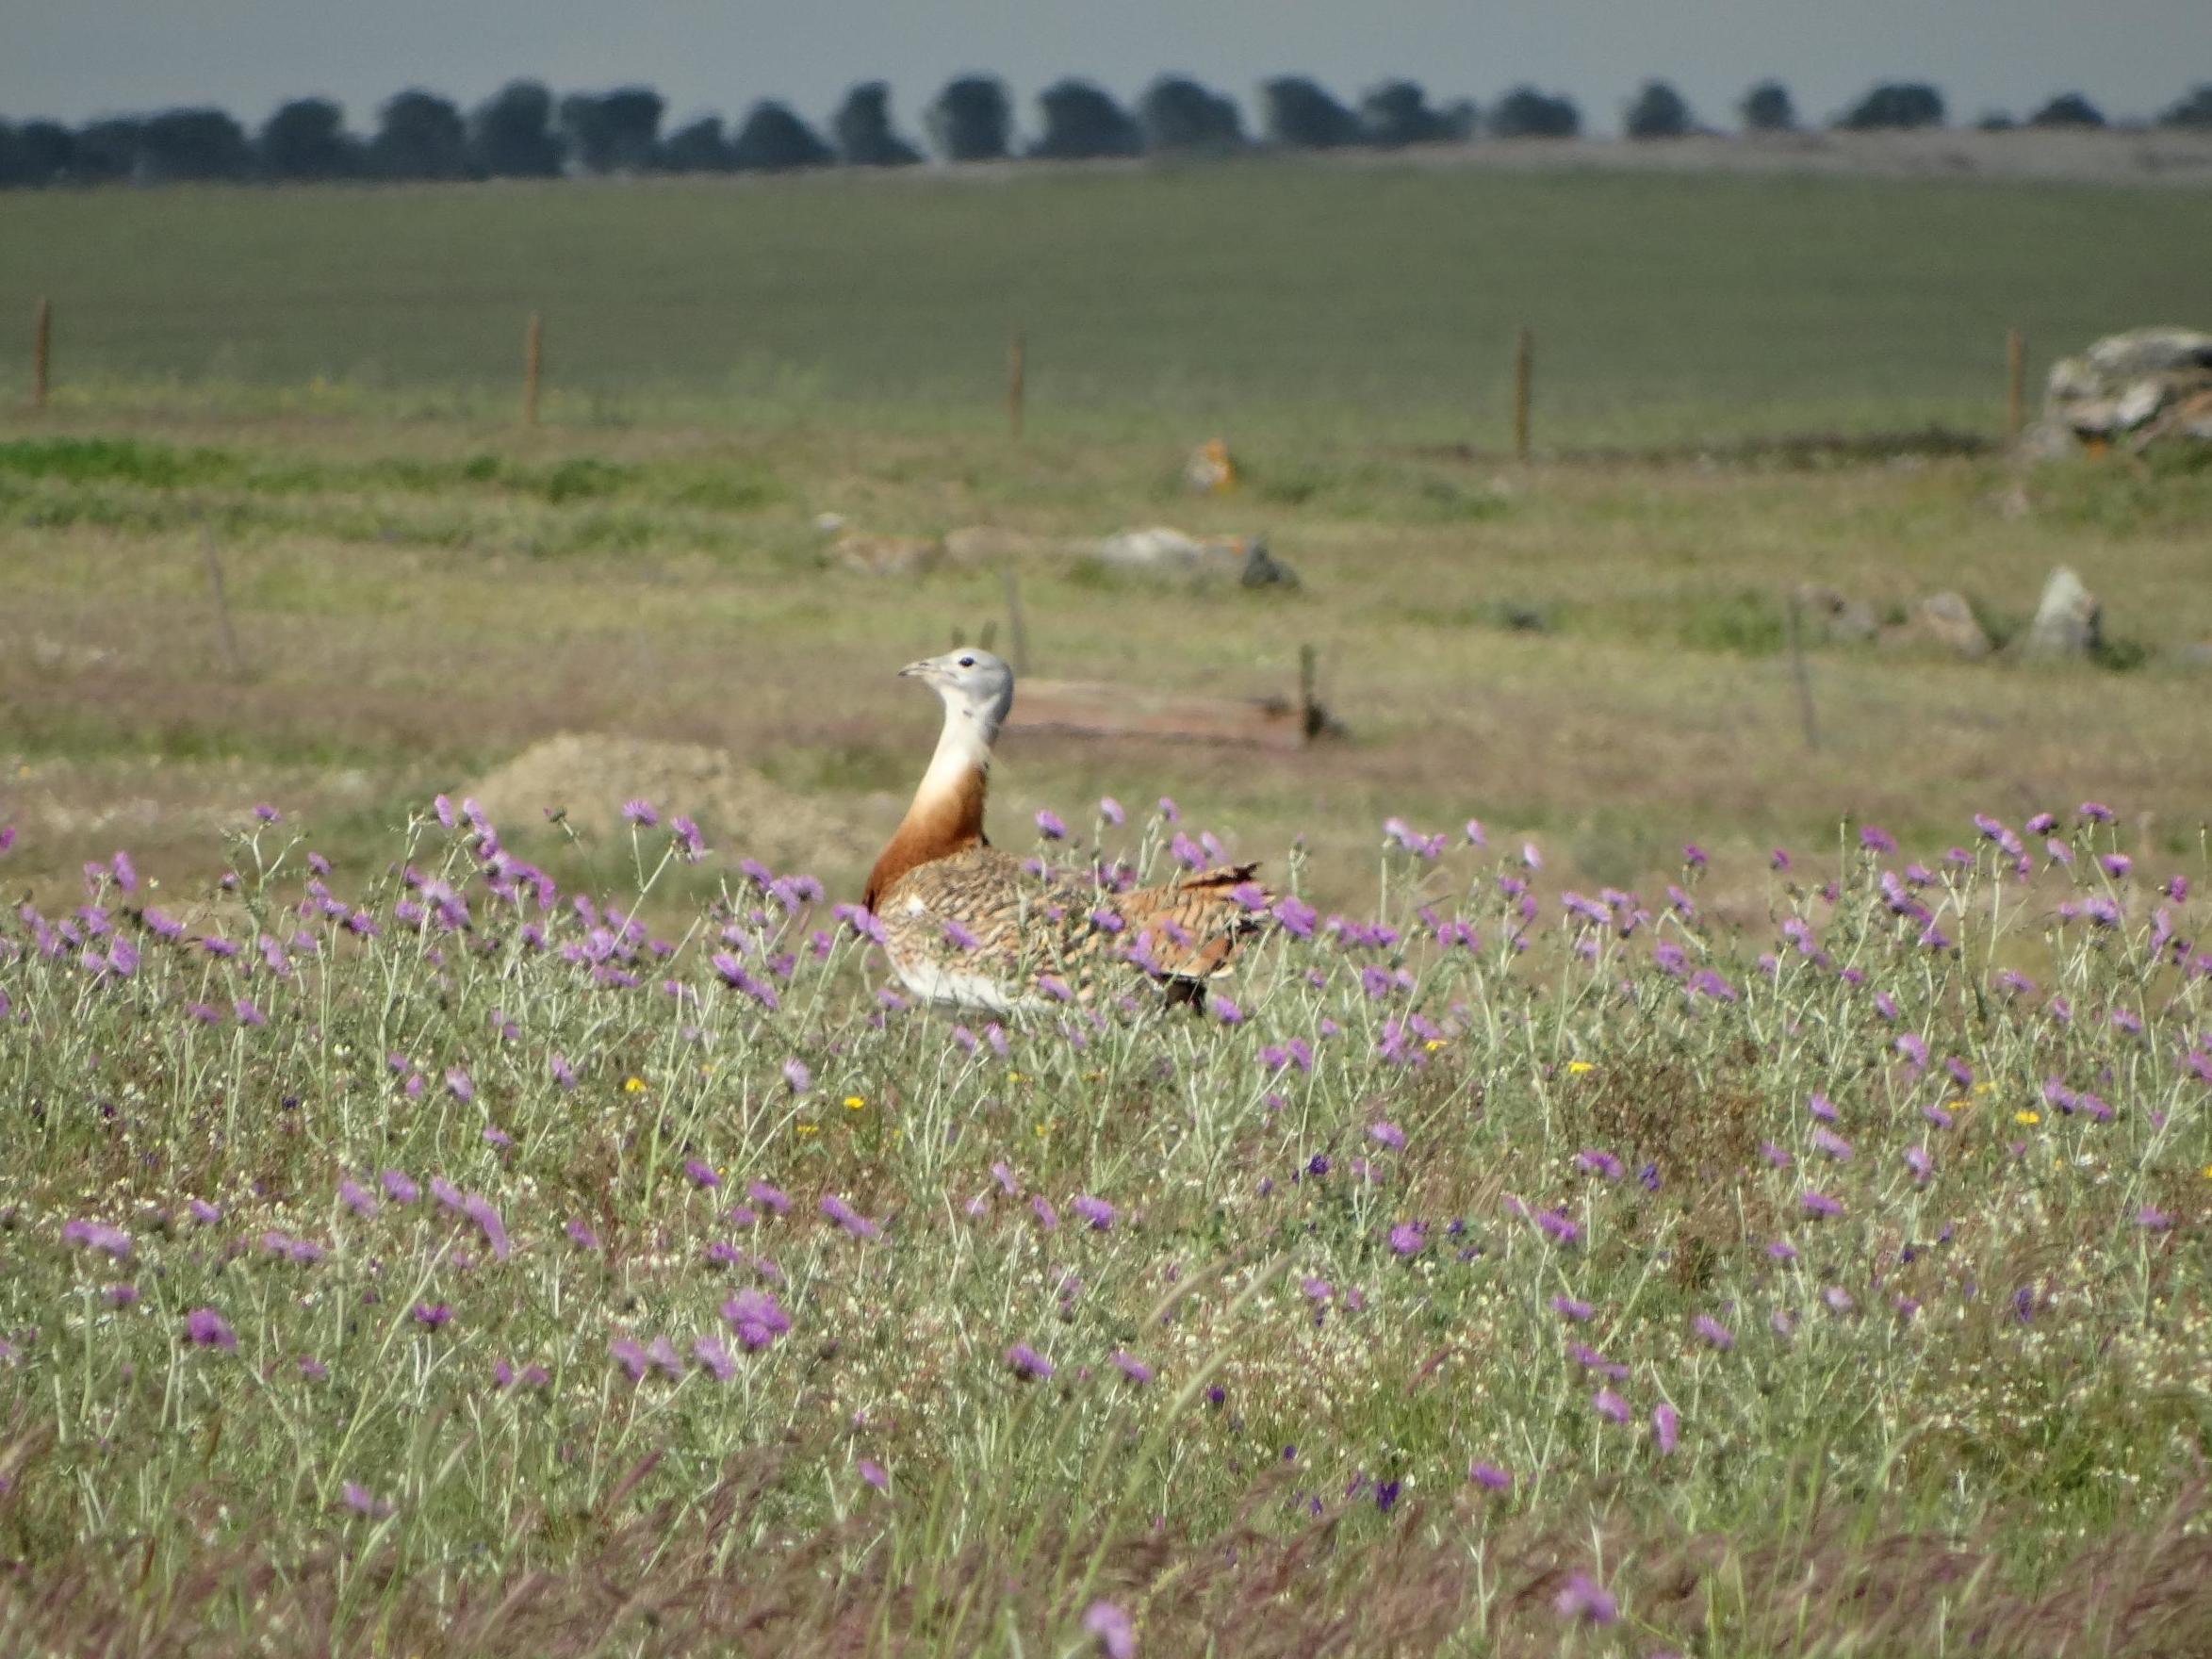 Up to a third of the world's population of great bustards live in the areas that are being converted